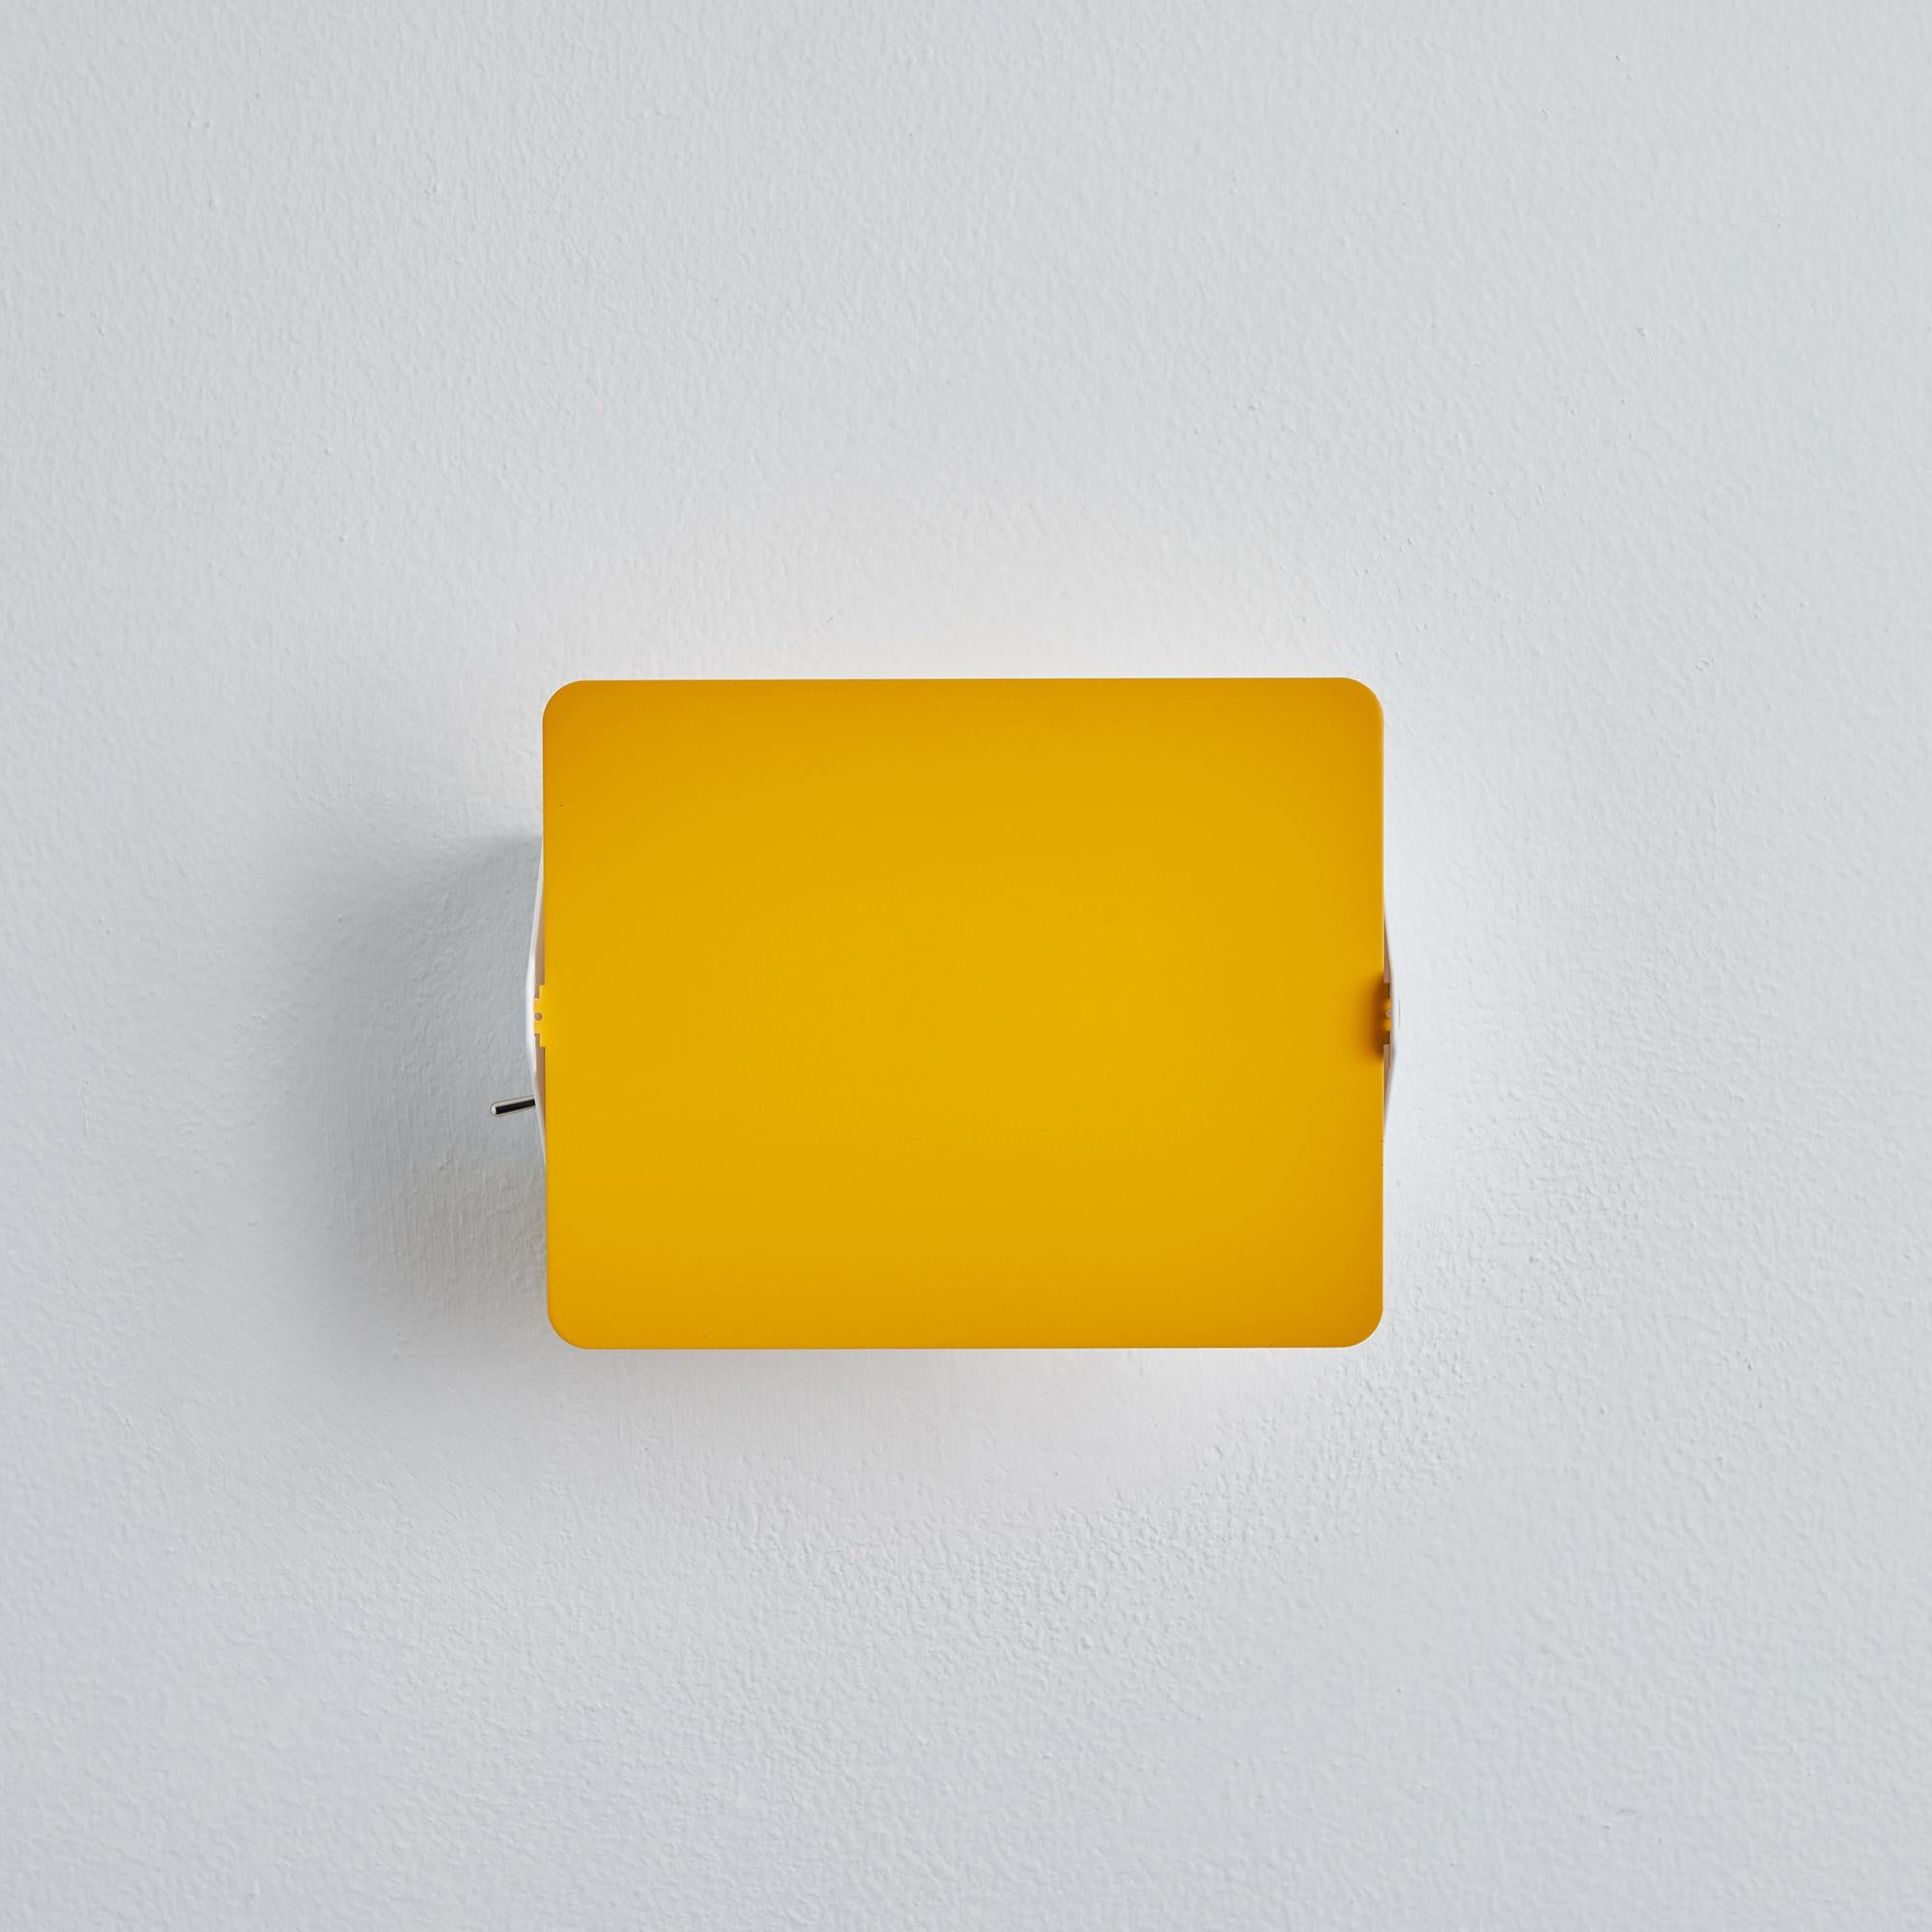 Pair of Charlotte Perriand yellow 'Applique Á Volet Pivotant' wall lights. 

Originally designed in the 1950s as the iconic CP1, these newly produced authorized re-editions are still made in France with the highest level of integrity and attention